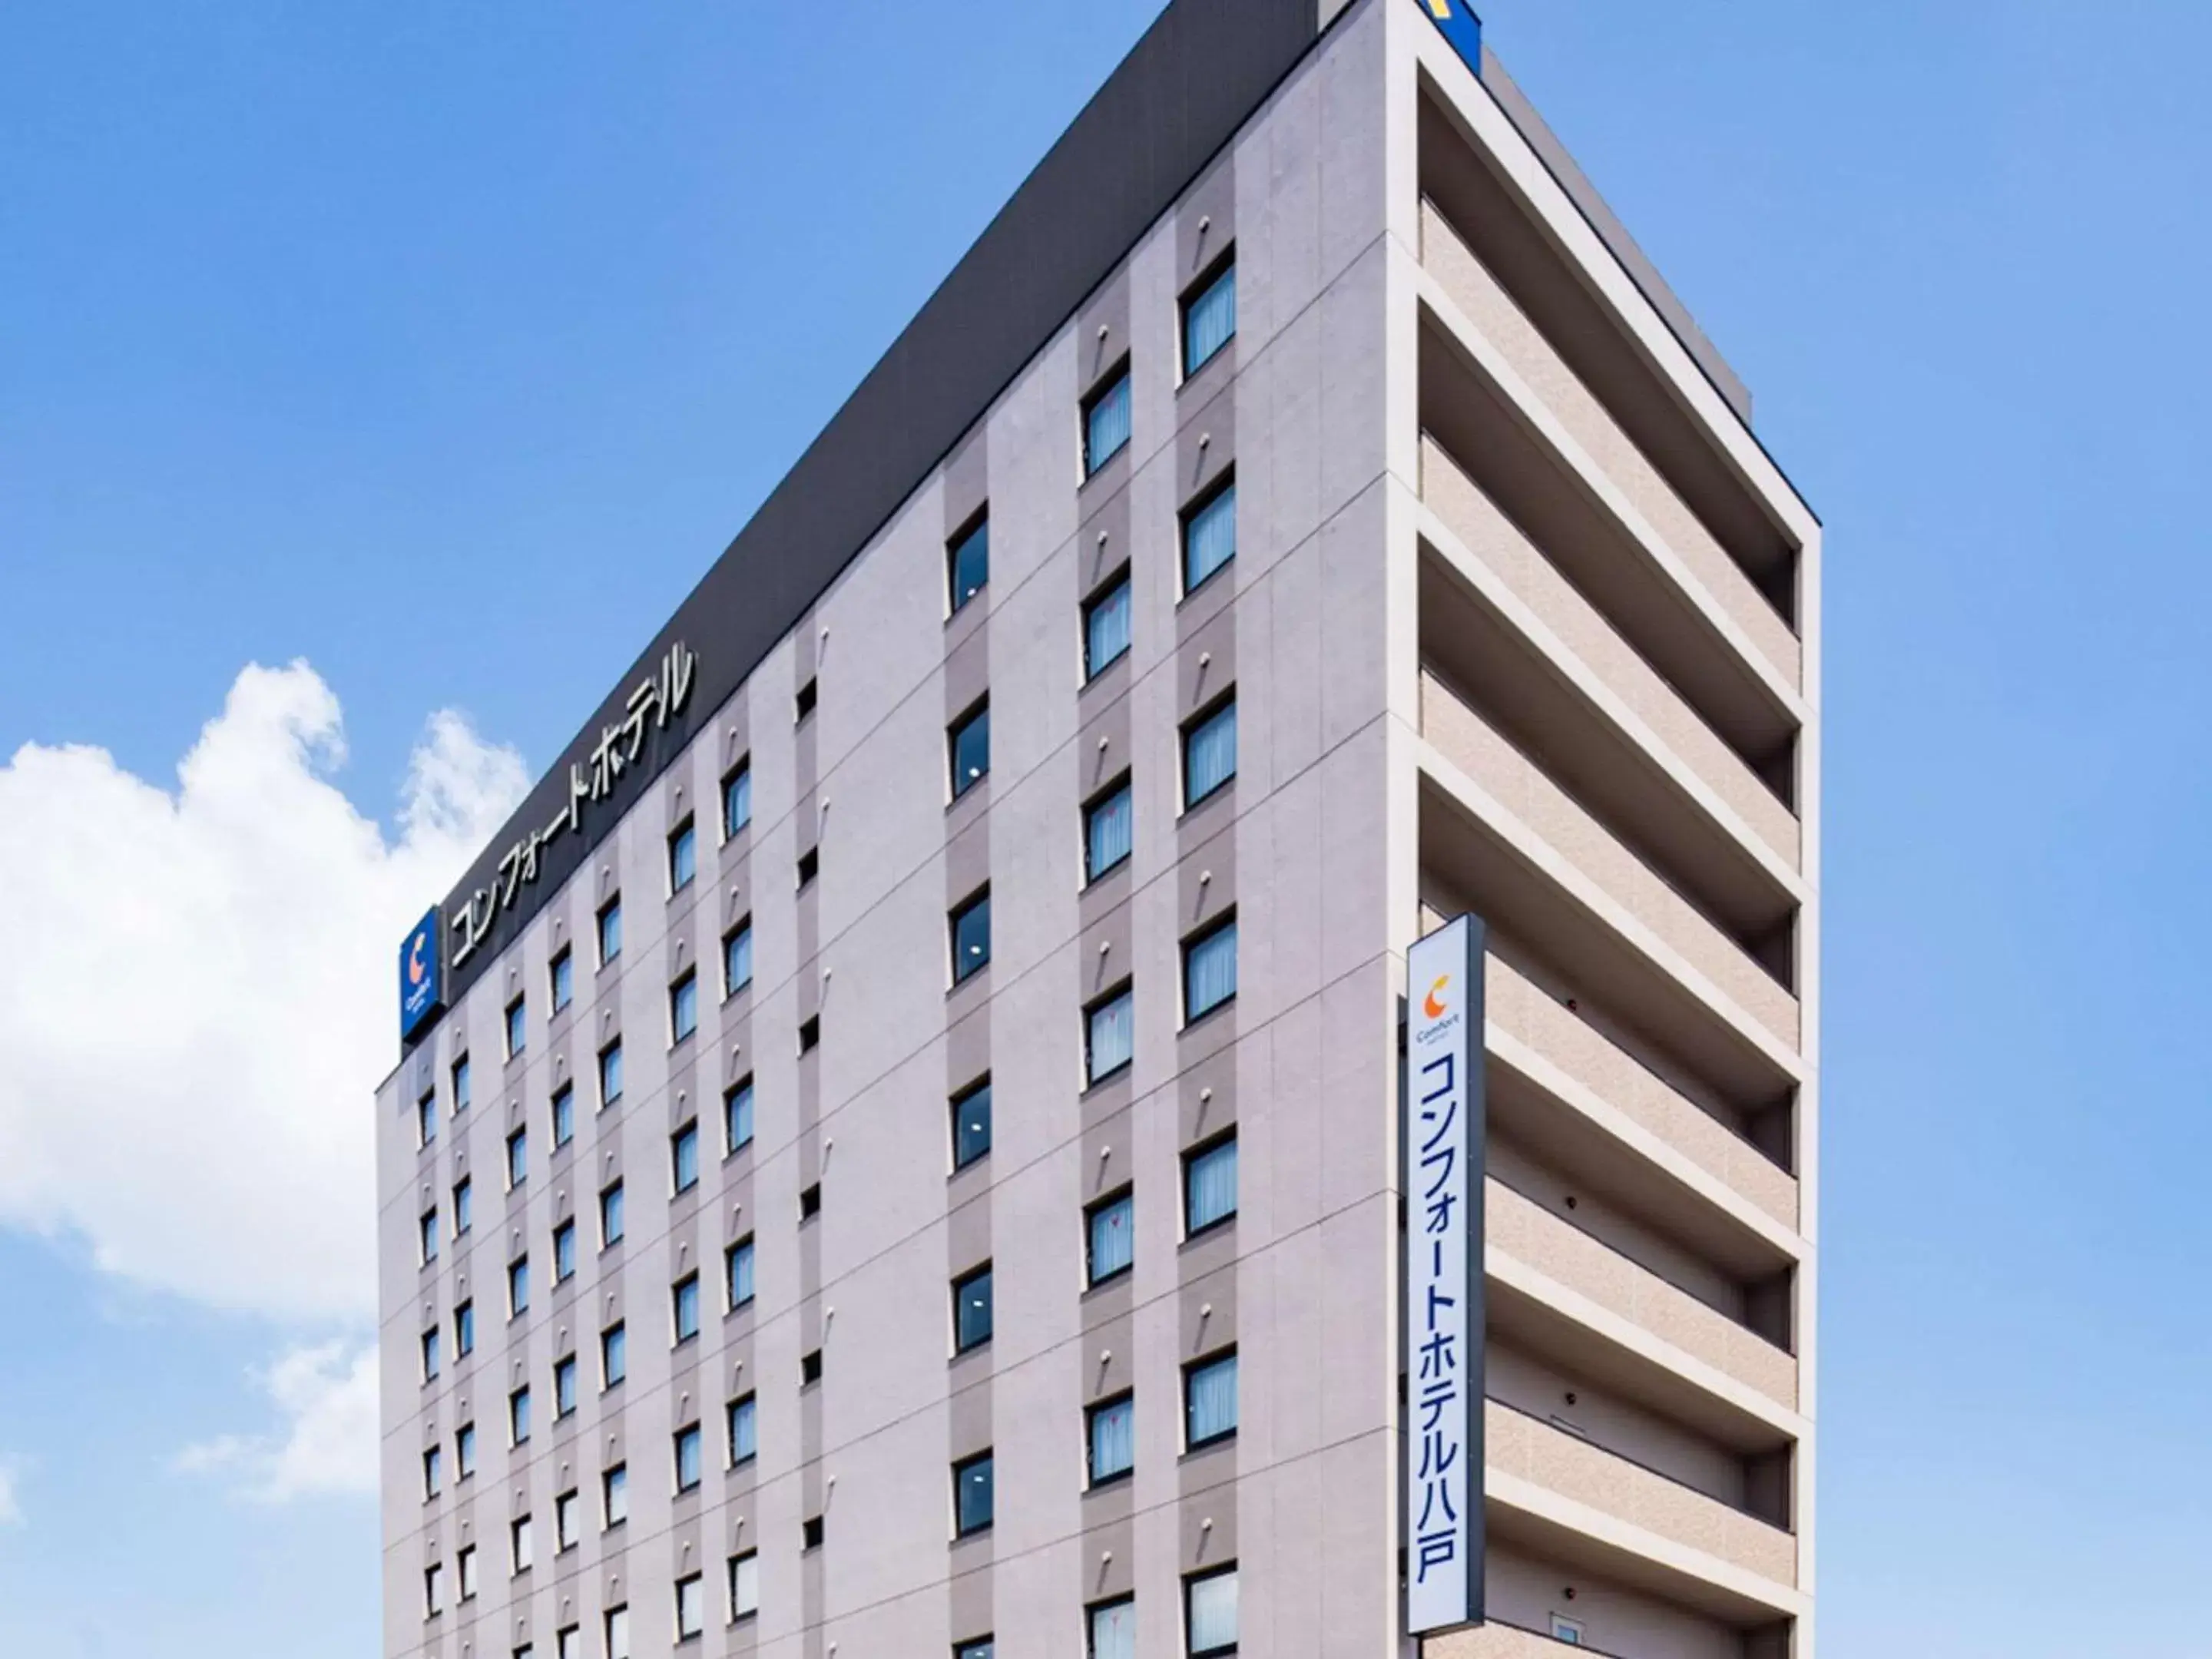 Property Building in Comfort Hotel Hachinohe